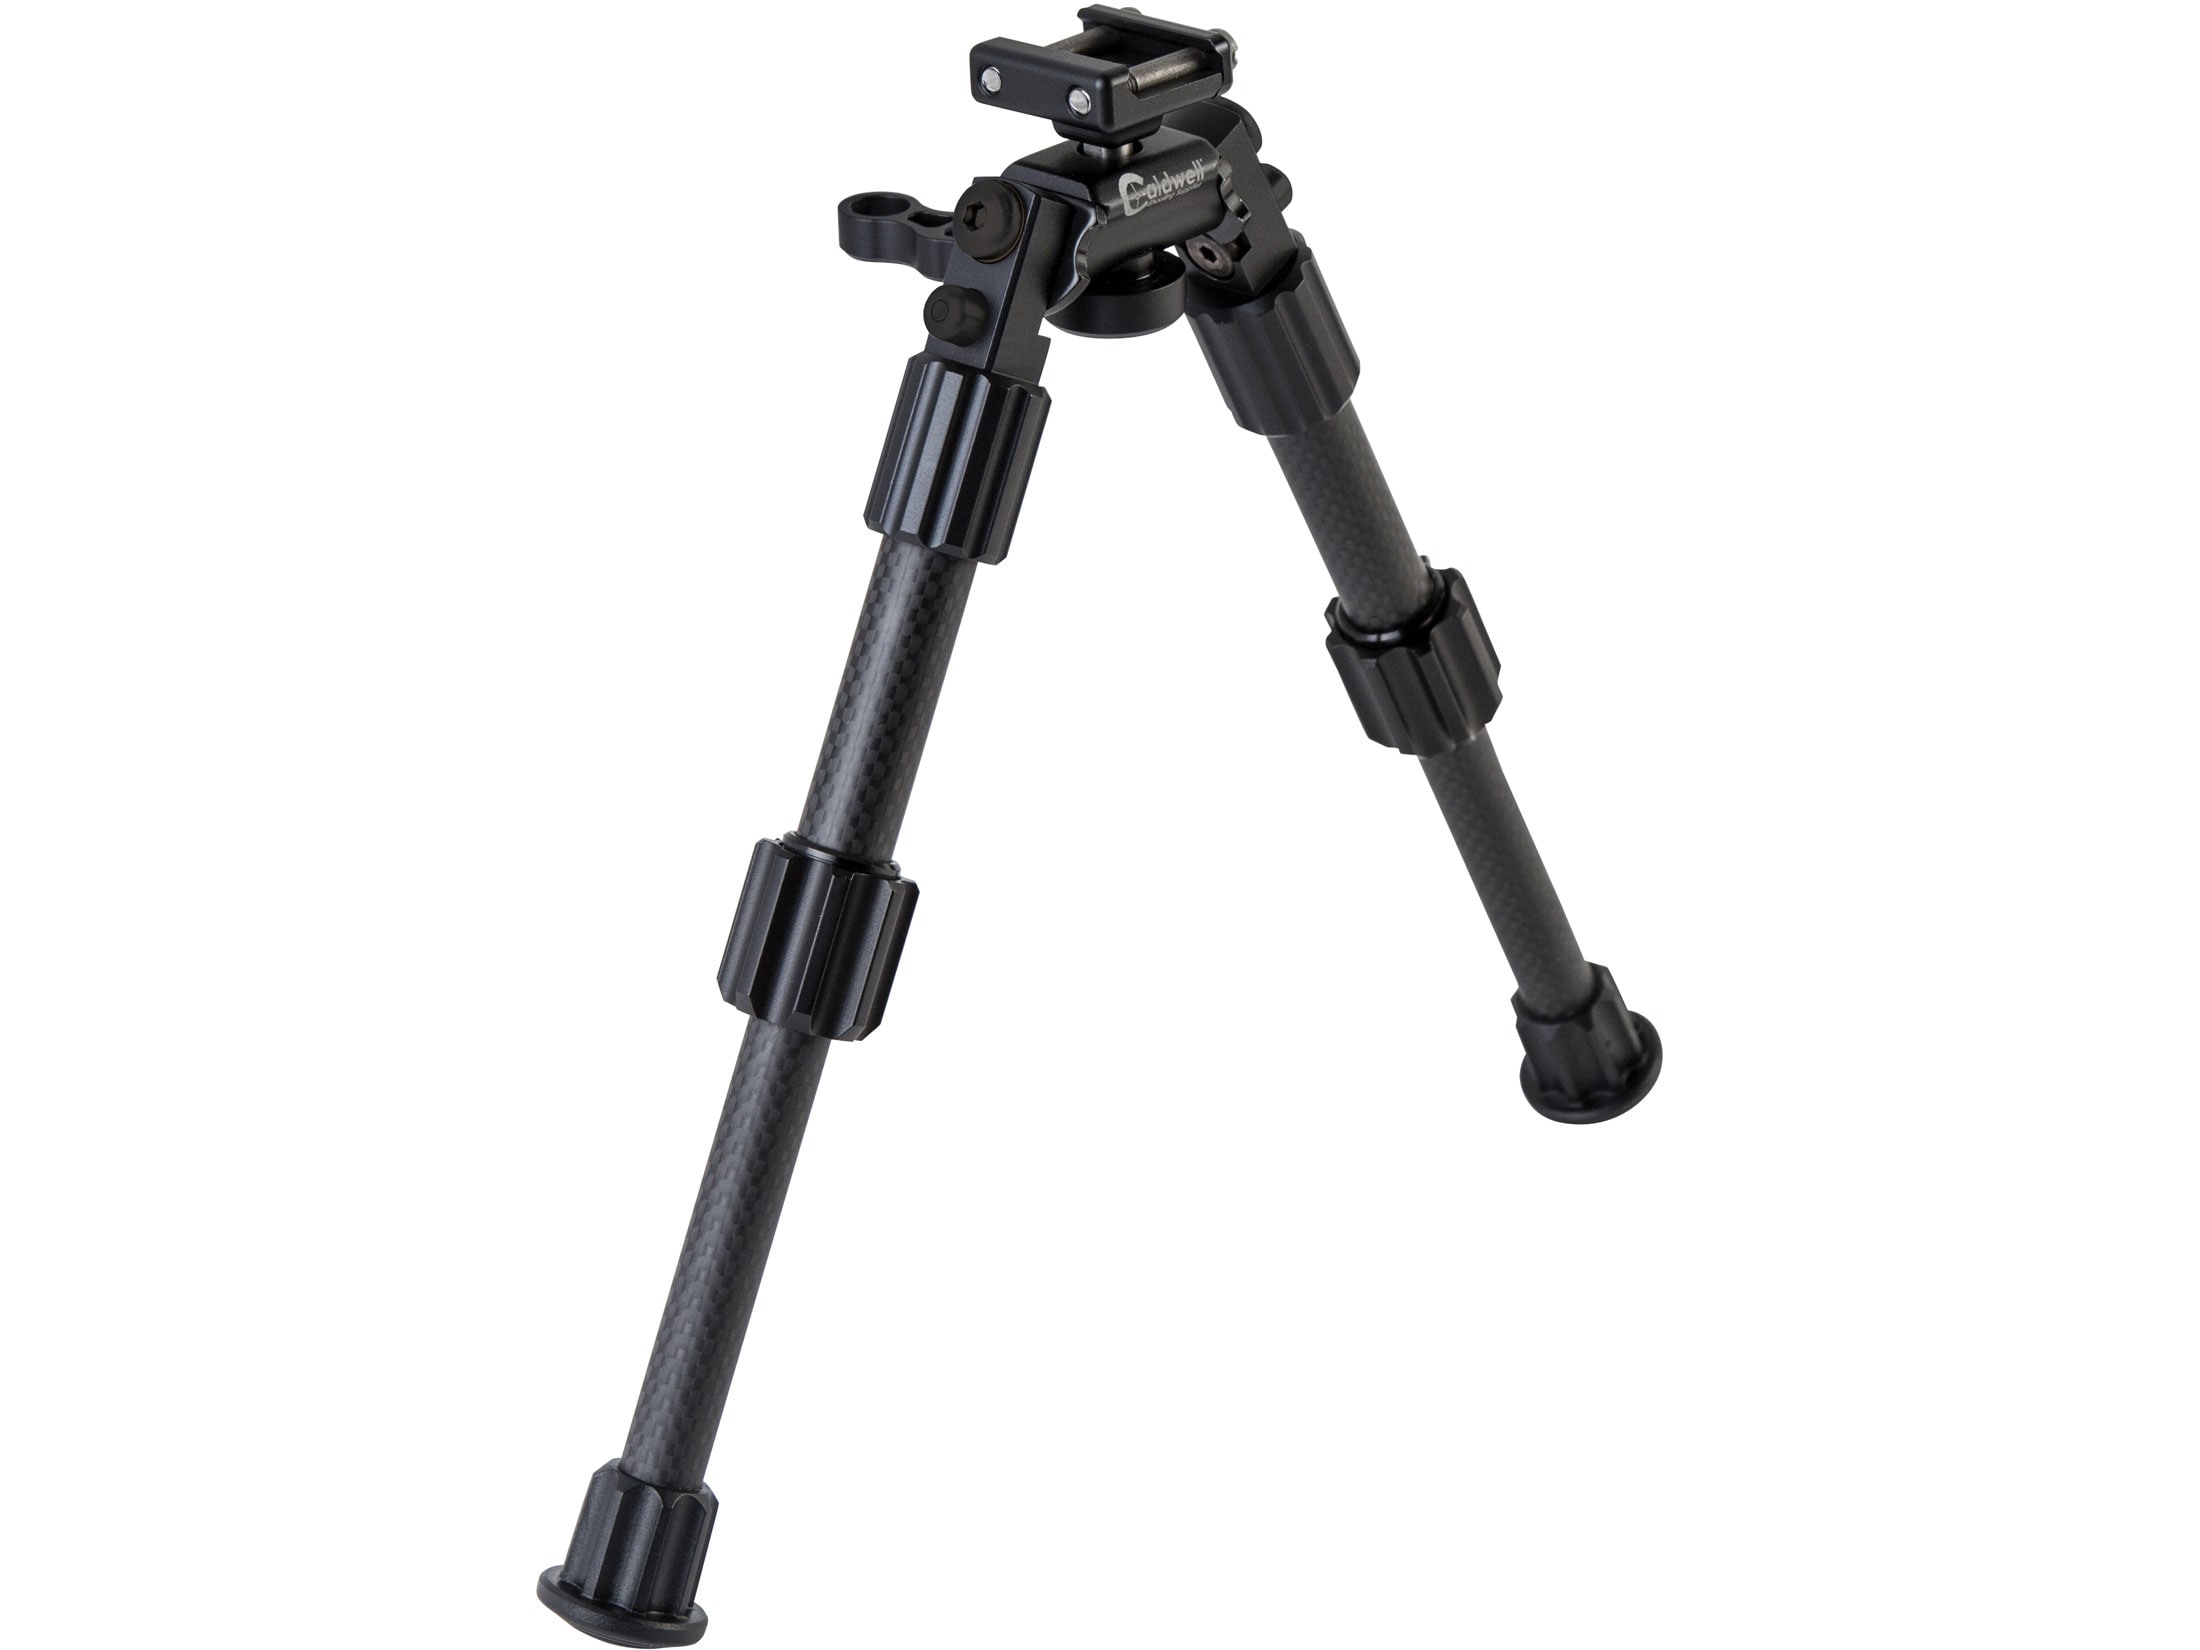 Metal Round/Flat Head Tactical Tripod Support Bipod Mount for Outdoor Rifle Game 